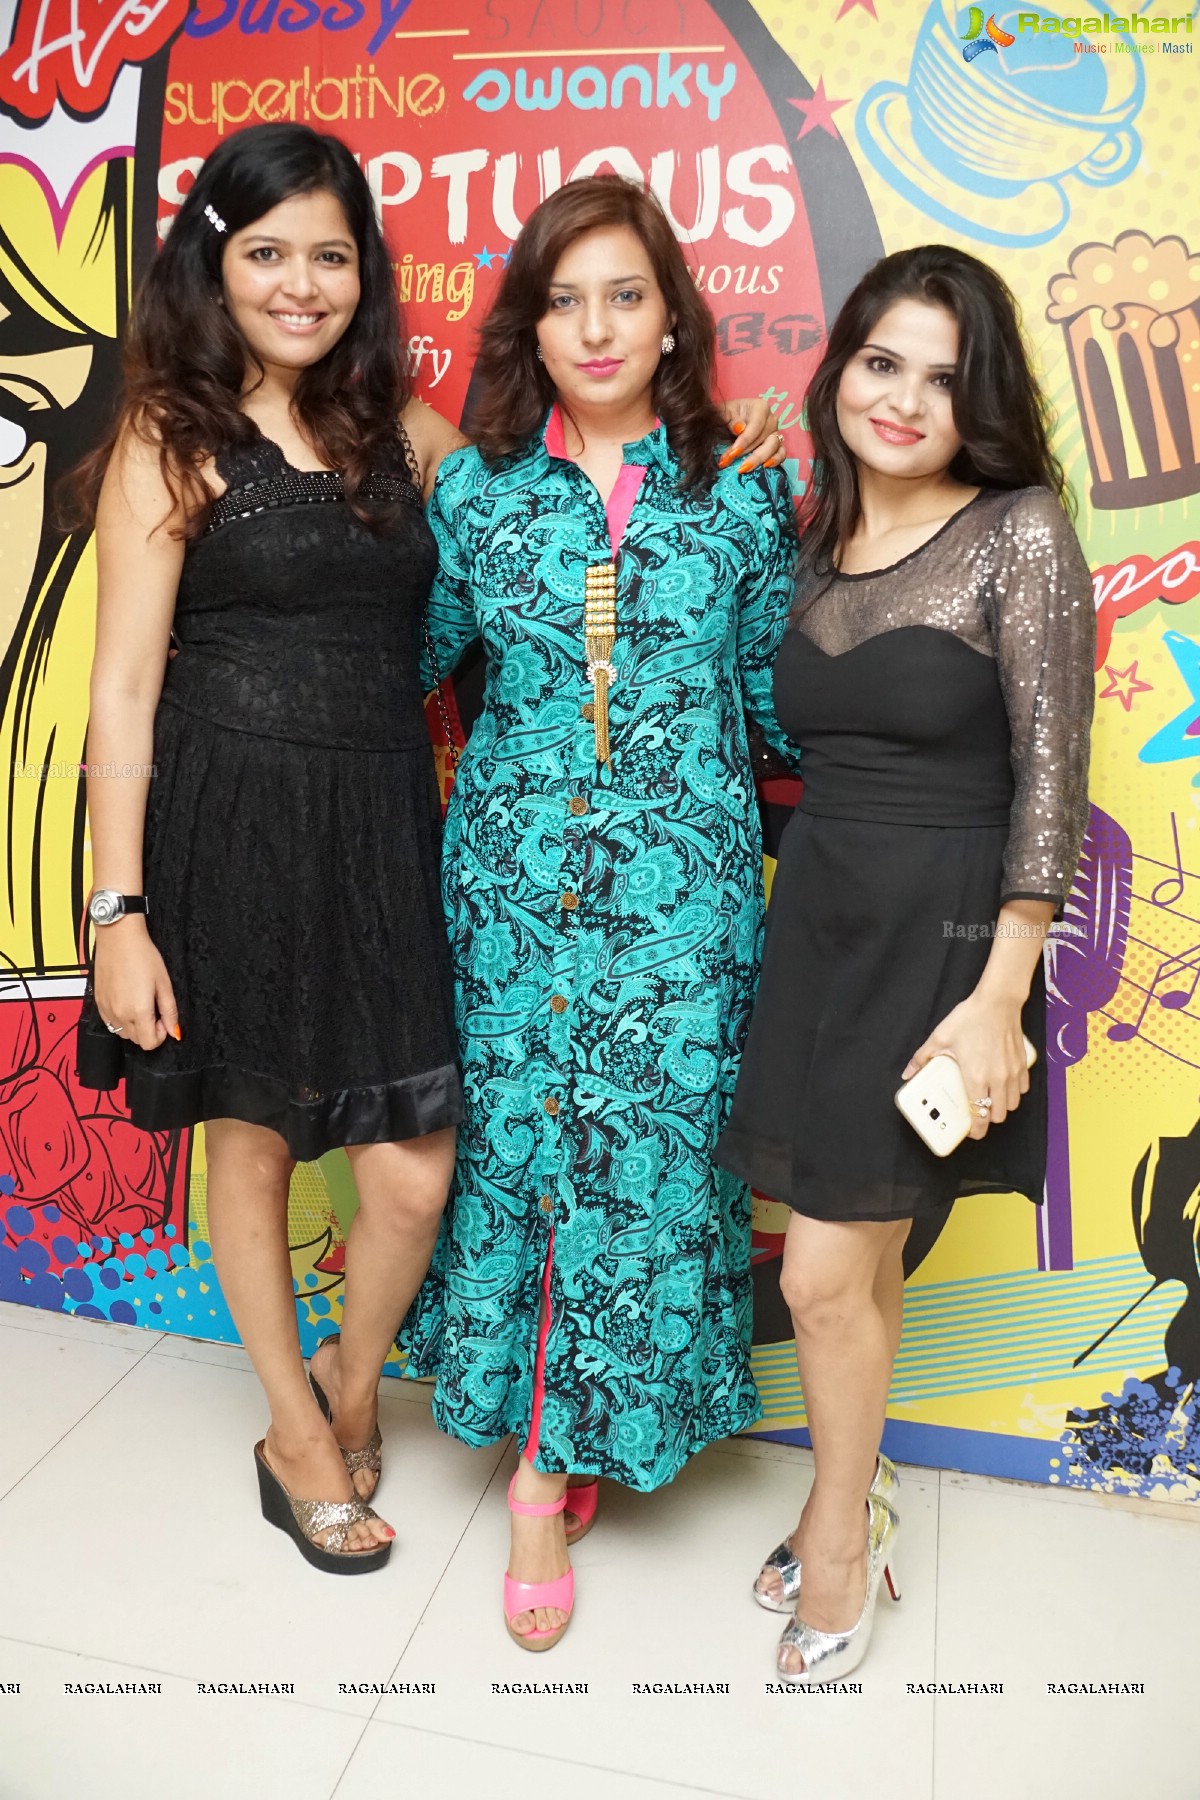 ASAP (As Social As Possible) - The Bistro Launch Party in Hyderabad